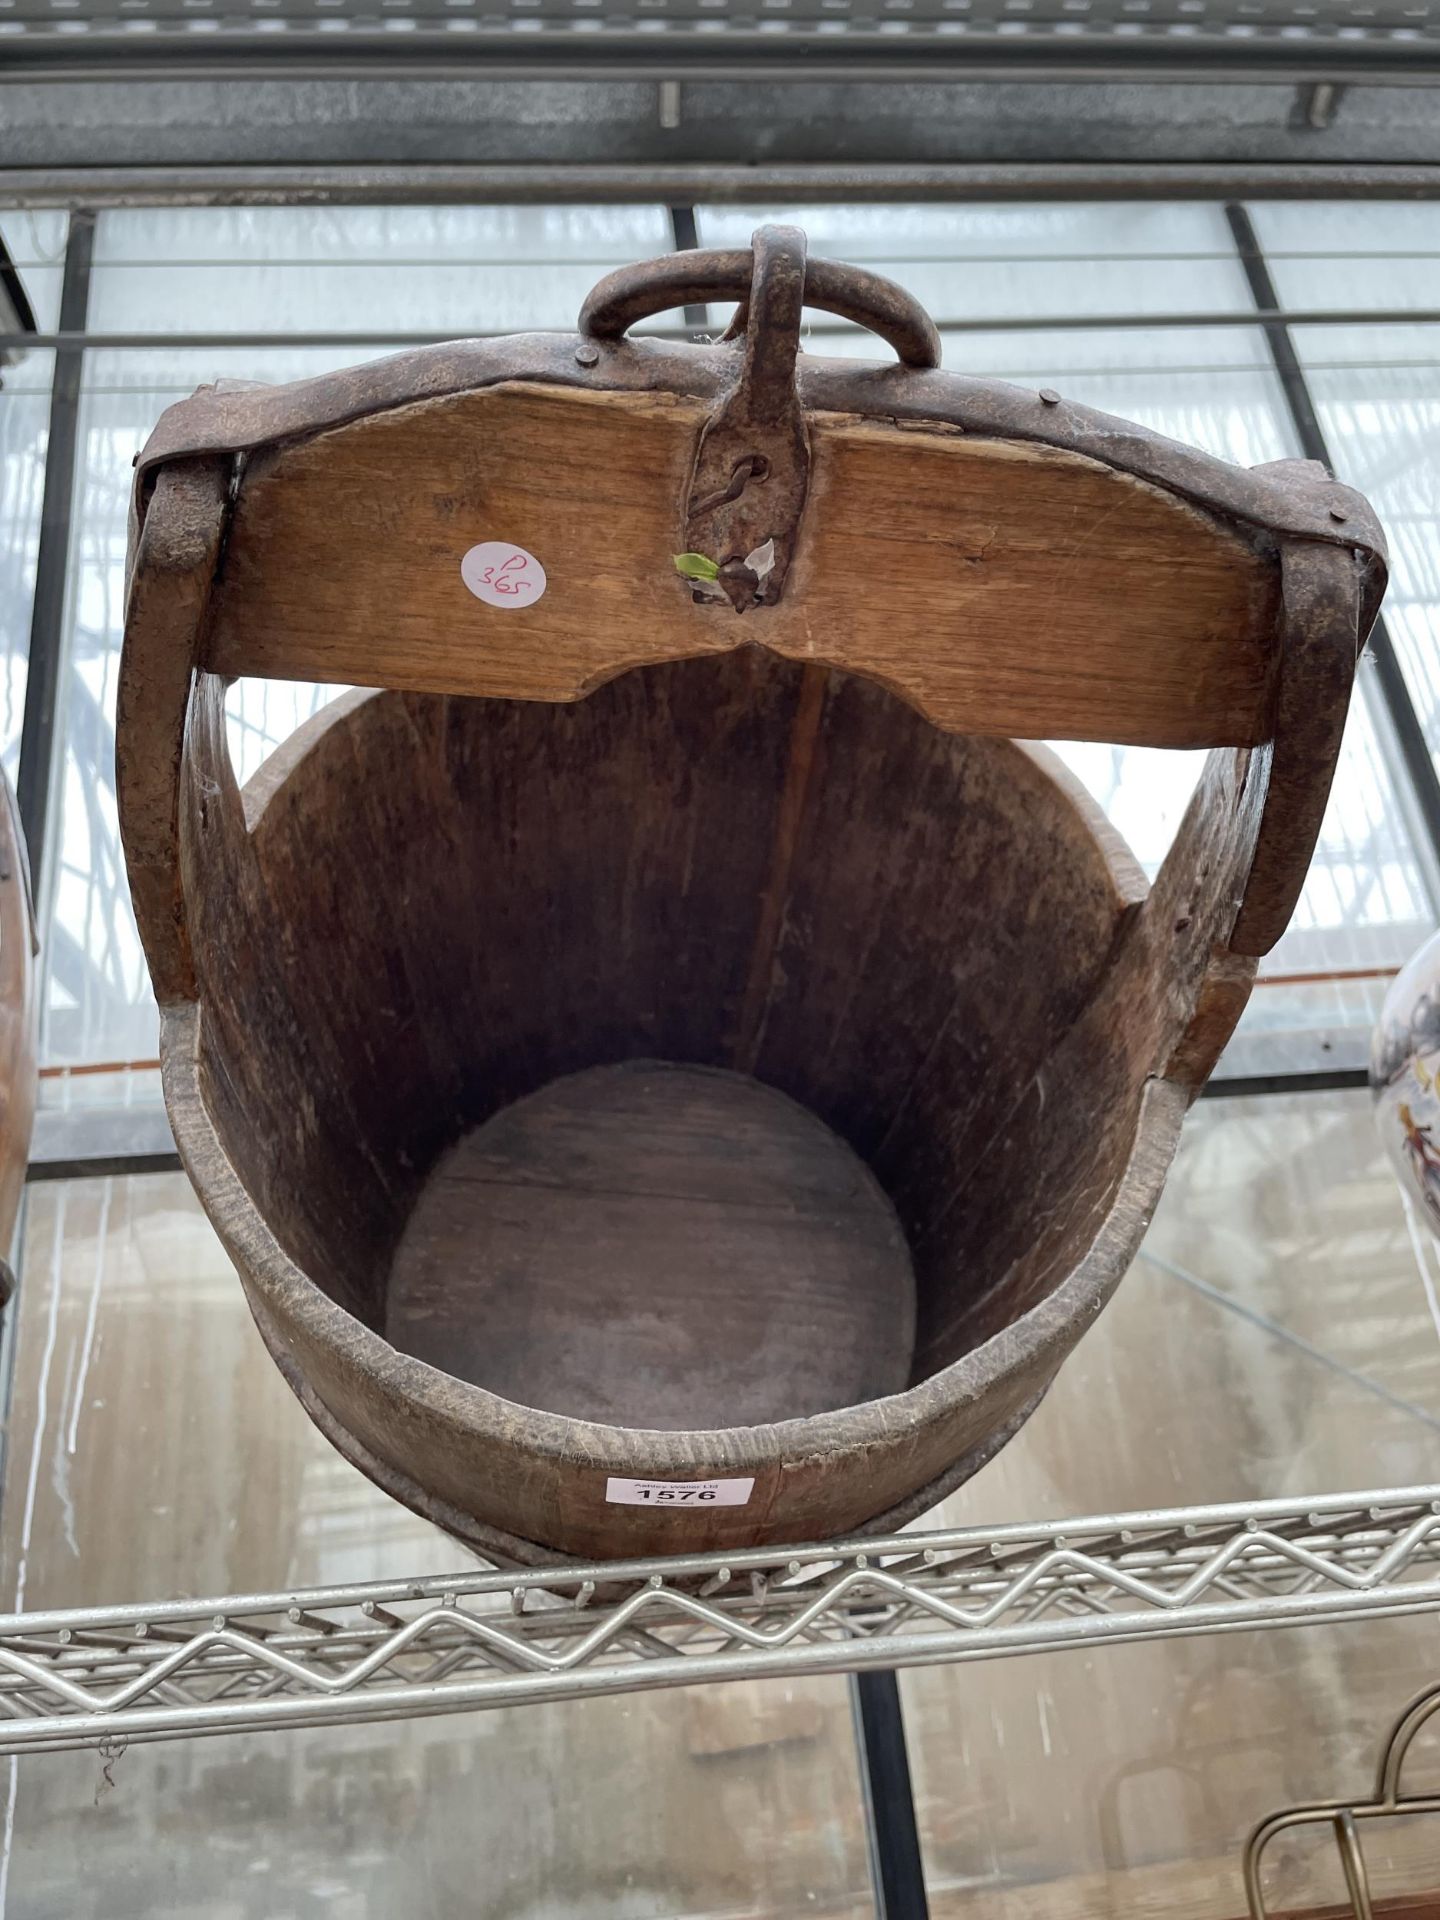 A VINTAGE OAK PAIL BUCKET WITH IRON BANDING AND LOOP - Image 2 of 2